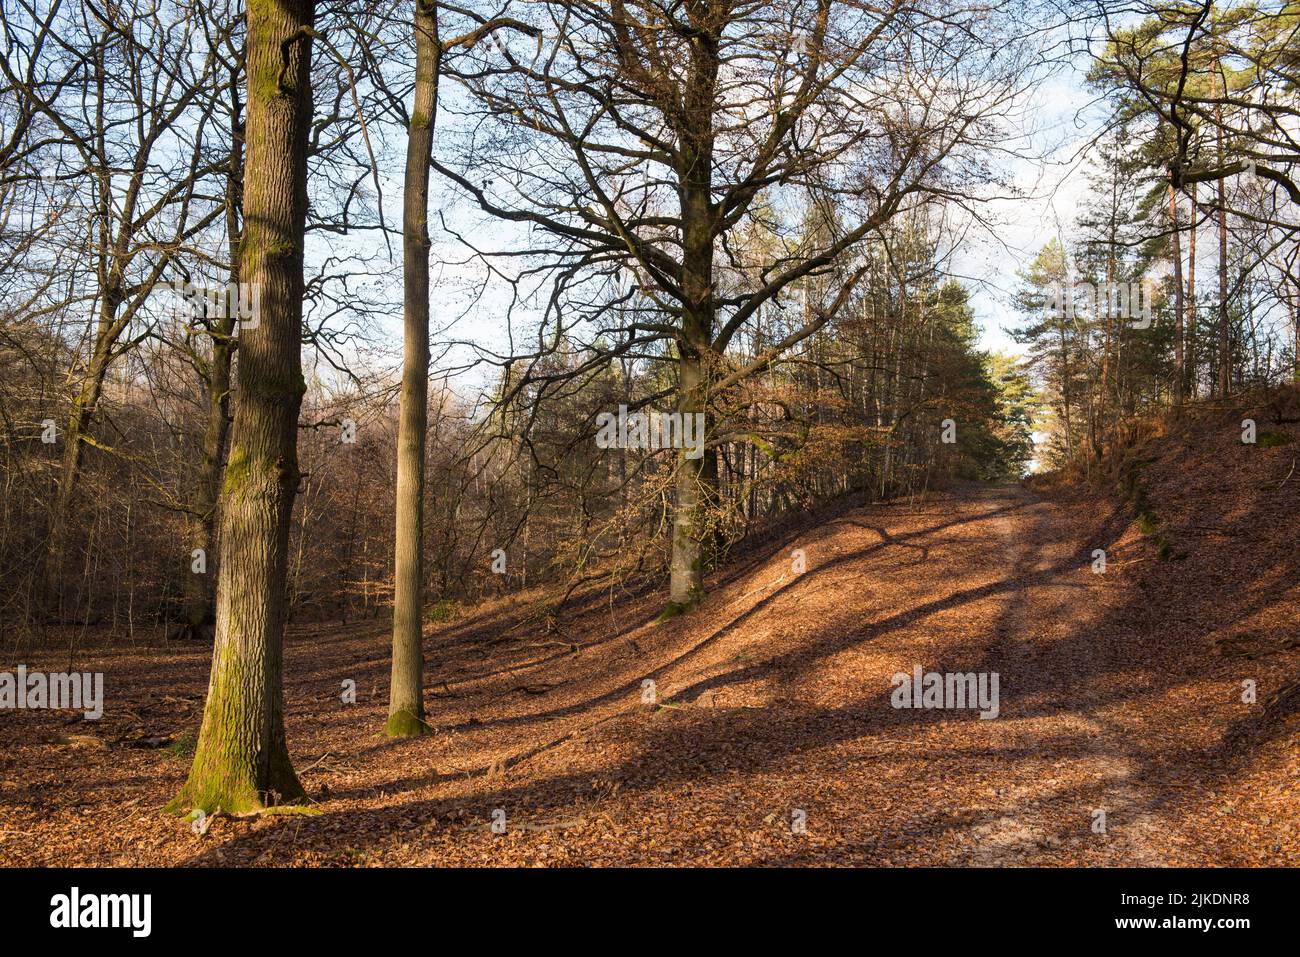 Path in the undergrowth of oak and beech trees, Forest of Rambouillet, Haute Vallee de Chevreuse Regional Natural Park, Yvelines department, Stock Photo